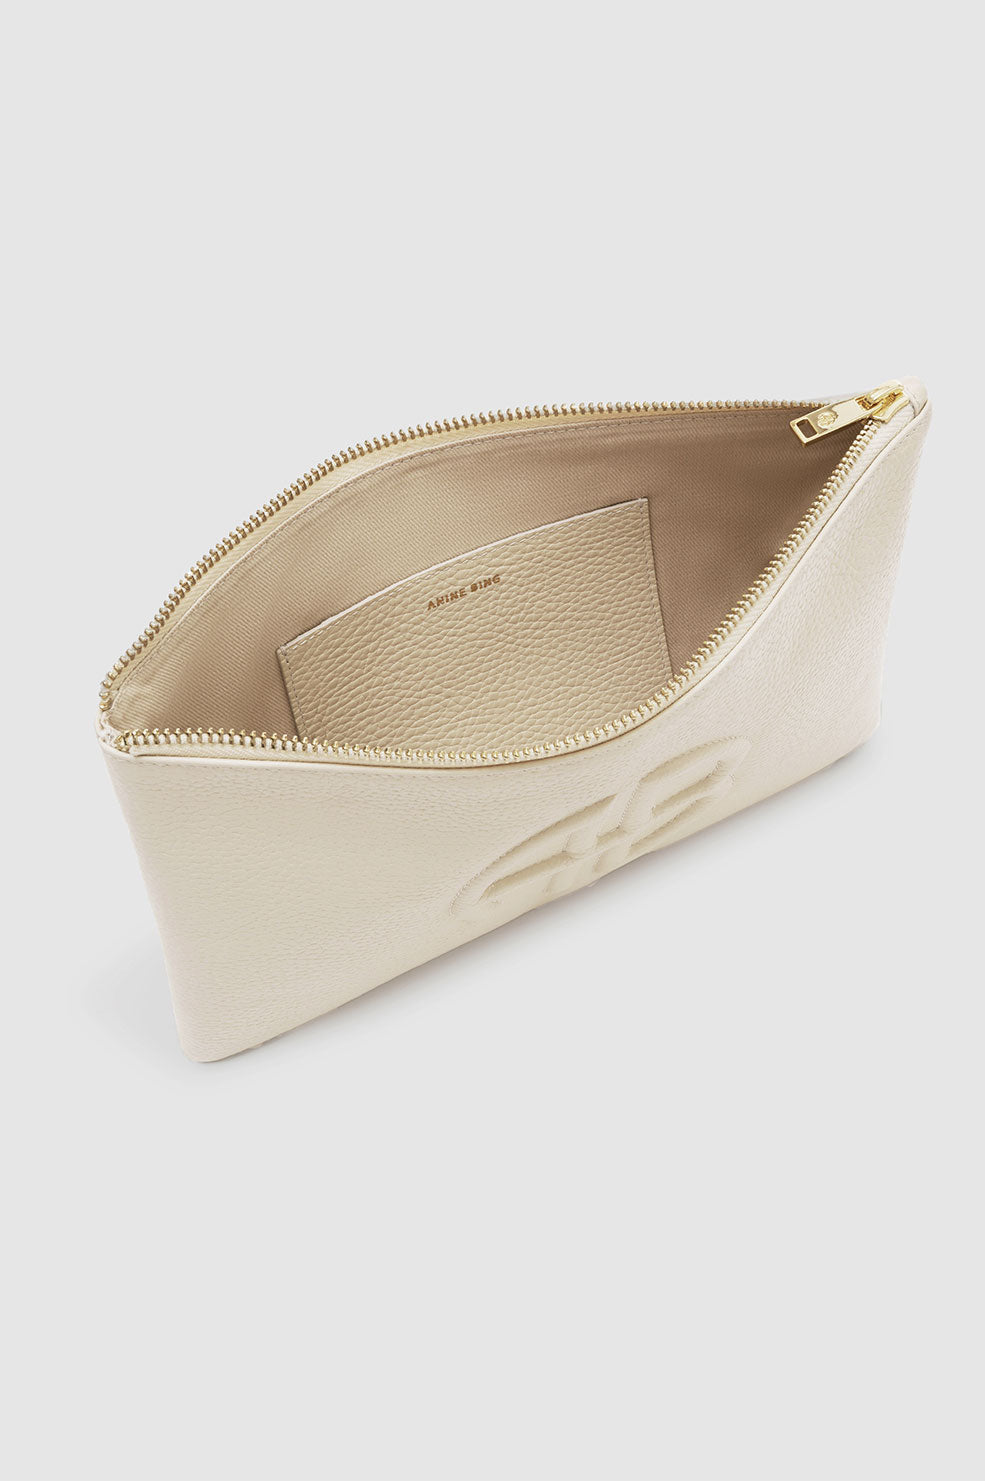 Anine Bing | Lili Pouch - Sand Pebbled